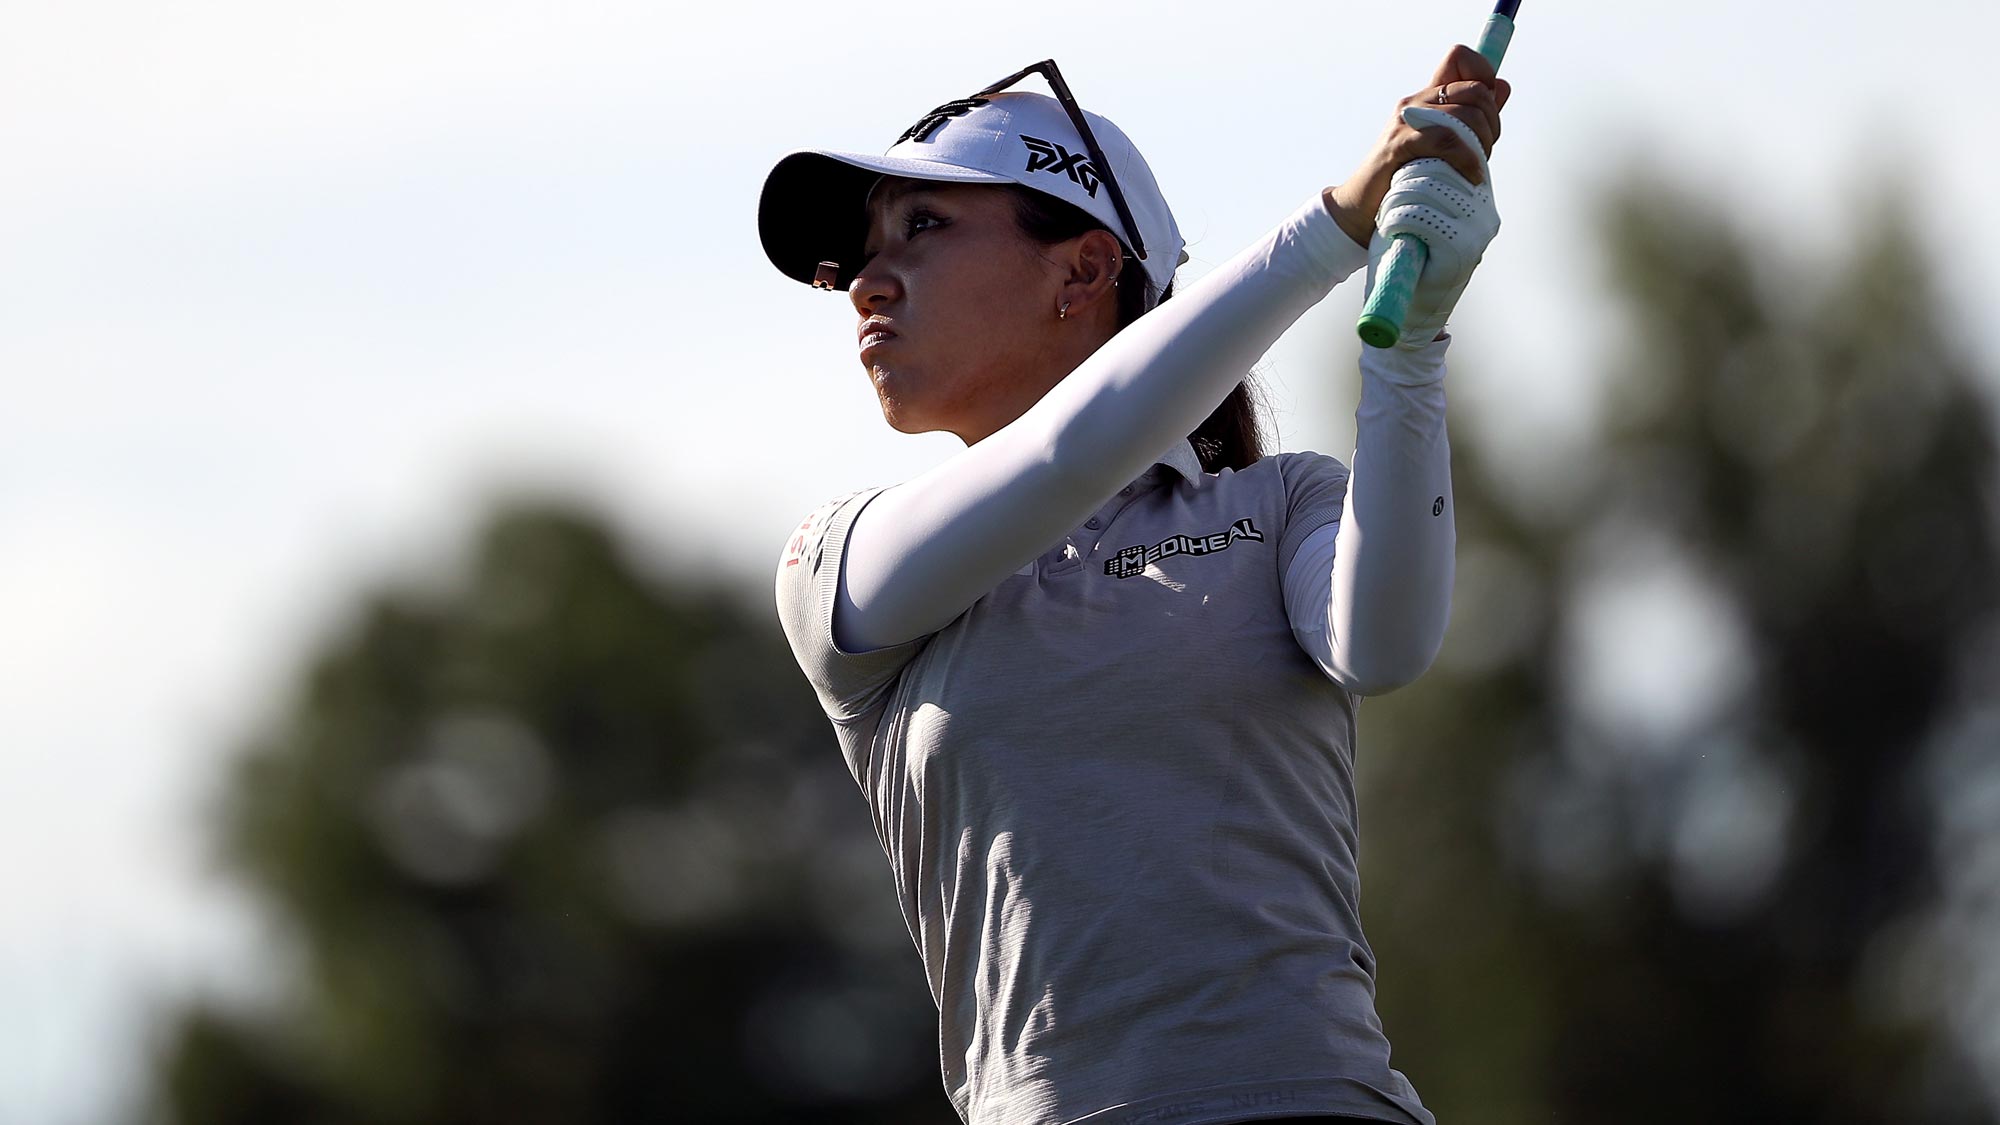 Lydia Ko of New Zealand plays her shot from the 15th tee during the first round of the LPGA Drive On Championship